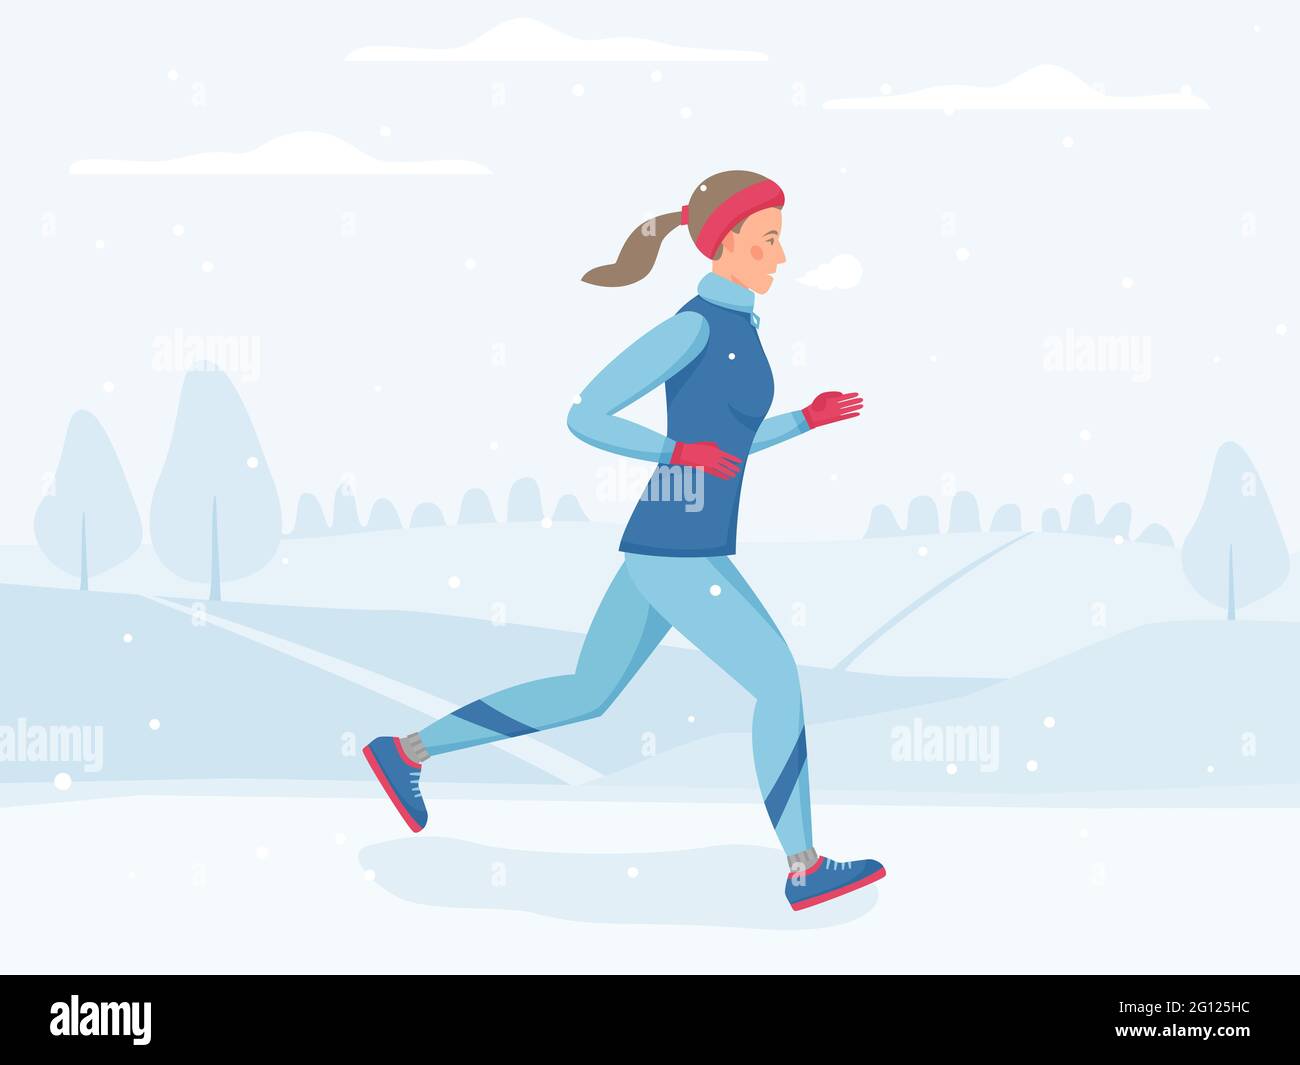 woman-running-in-winter-park-jogging-outside-in-cold-weather-sport-and-physical-activity-outdoors-in-freezing-cold-vector-illustration-in-flat-styl-2g125hc.jpg